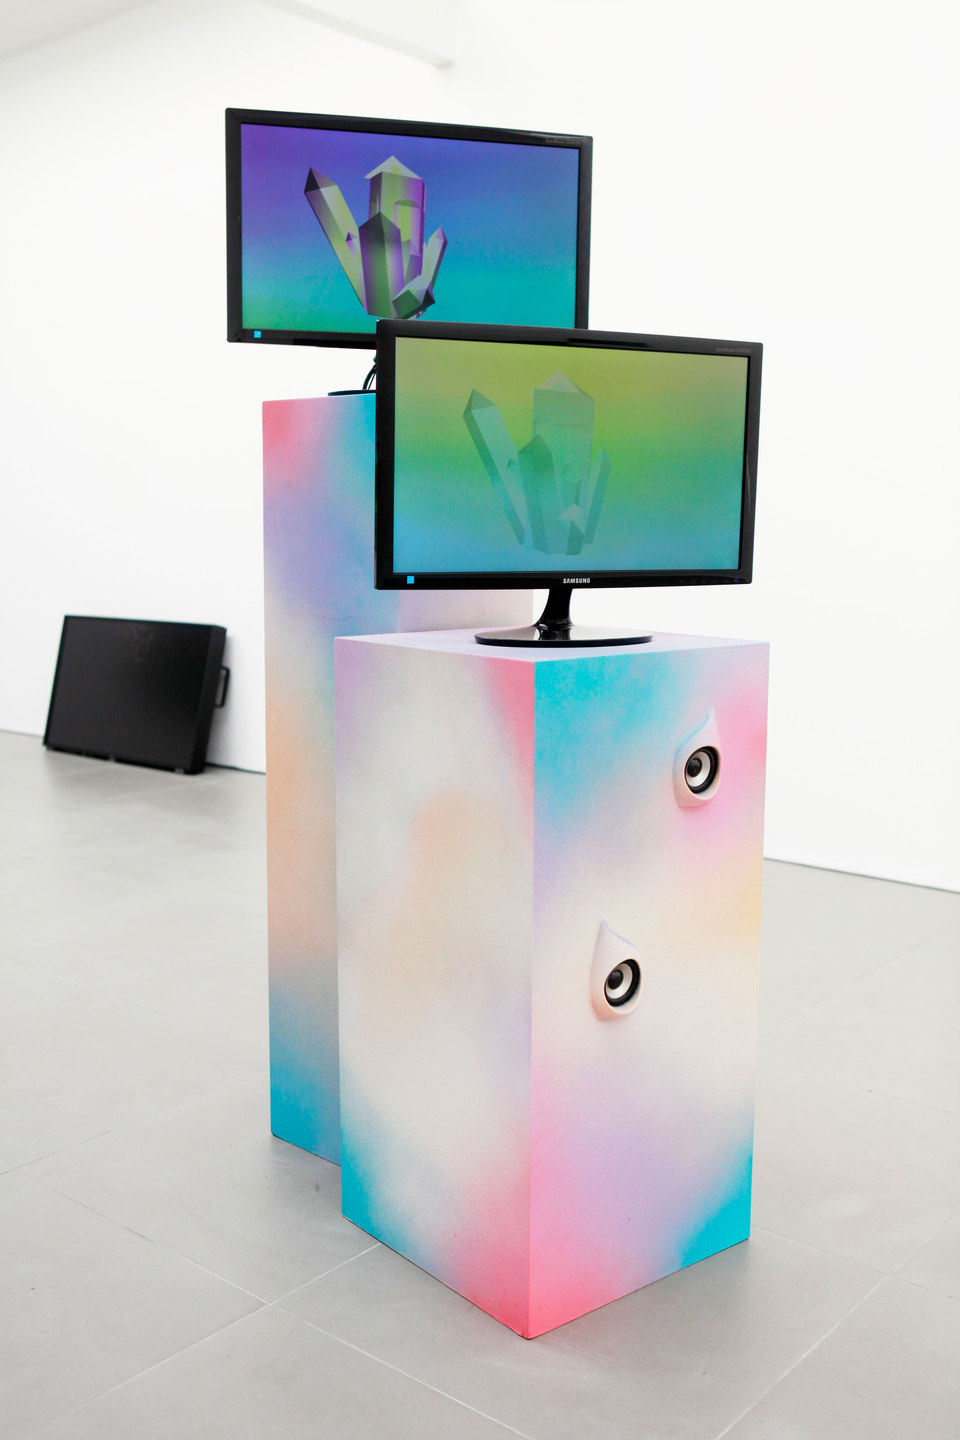 Adham Faramawy, Violet Likes Psychic Honey 2, 2012, Looped video + sculpture, 164 x 31 x 31 cm and 130 x 43 x 43 cm, Cell Project Space